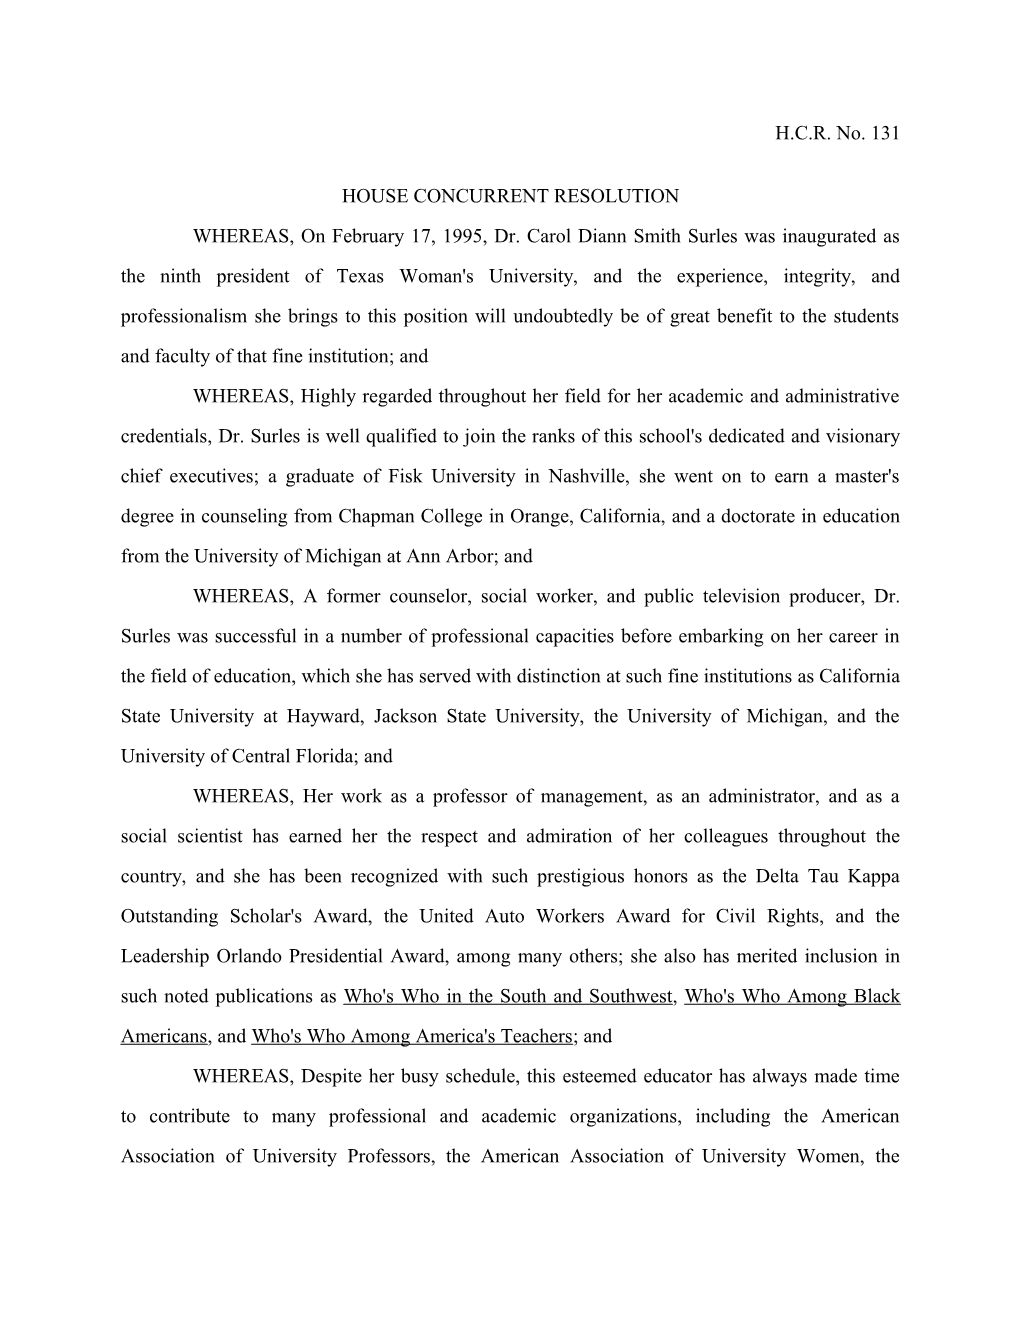 House Concurrent Resolution s1